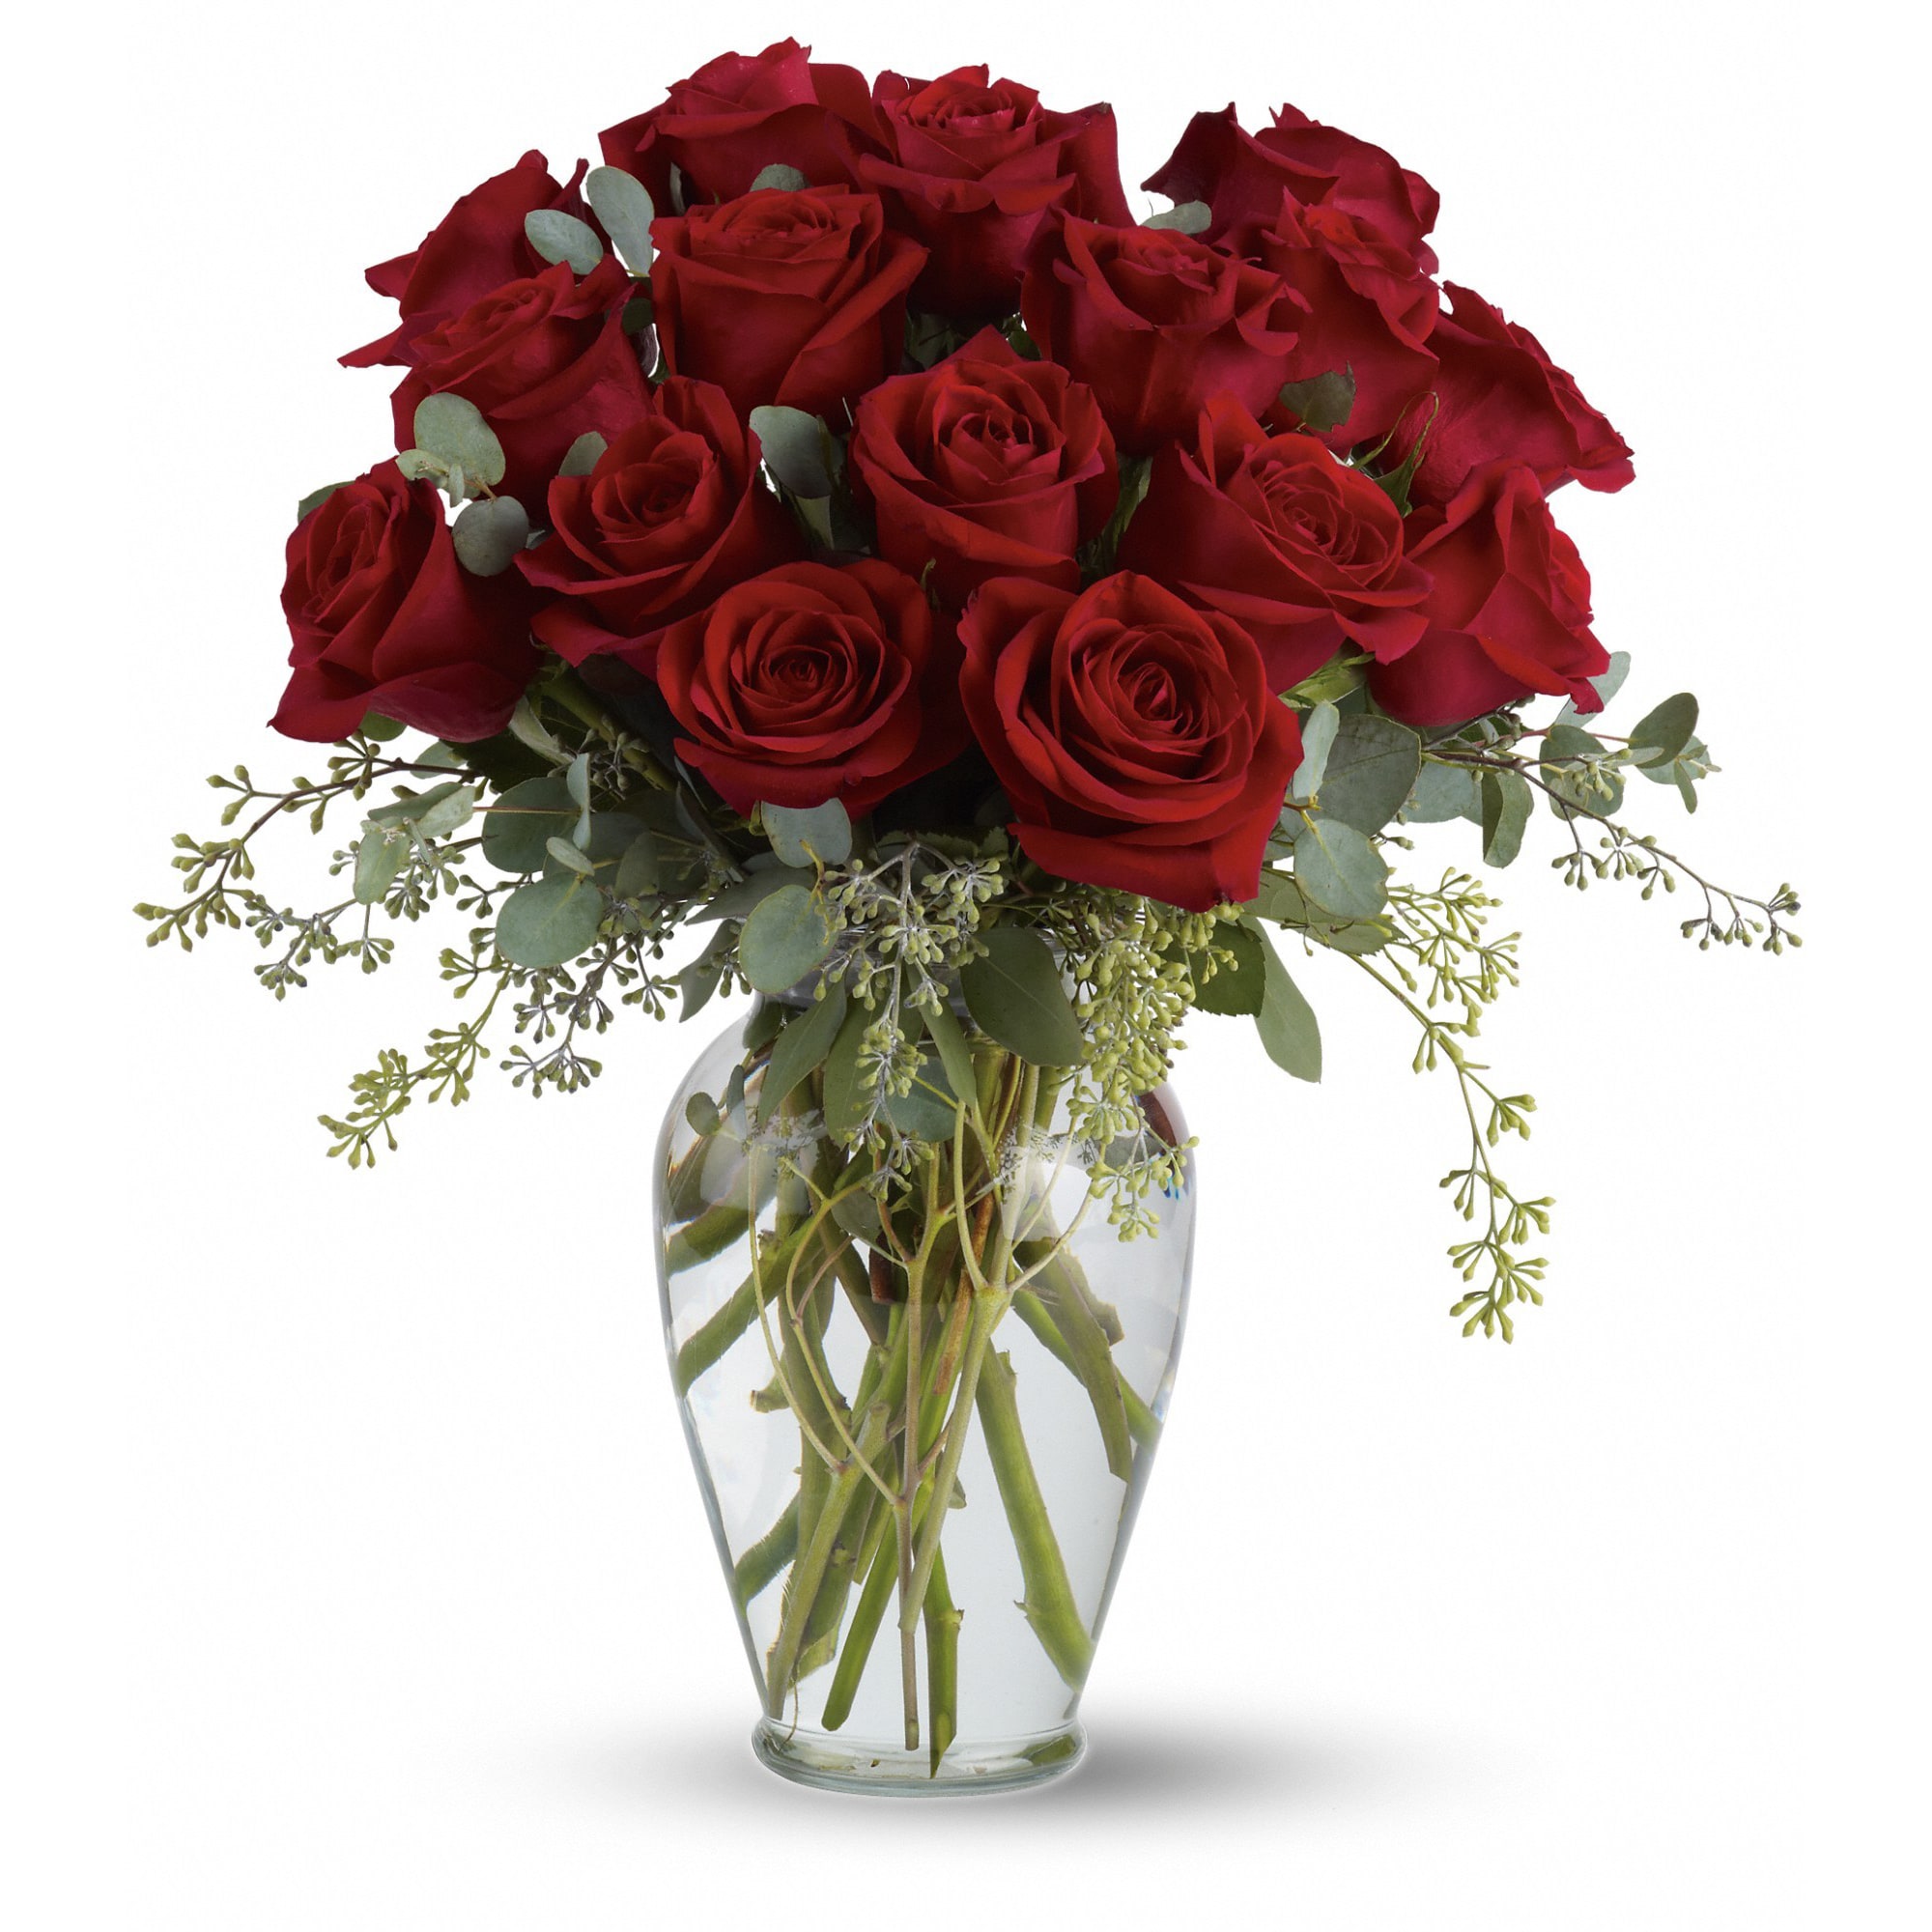 Full Heart - 16 Premium Red Roses by Teleflora in Harrisburg, PA | The ...